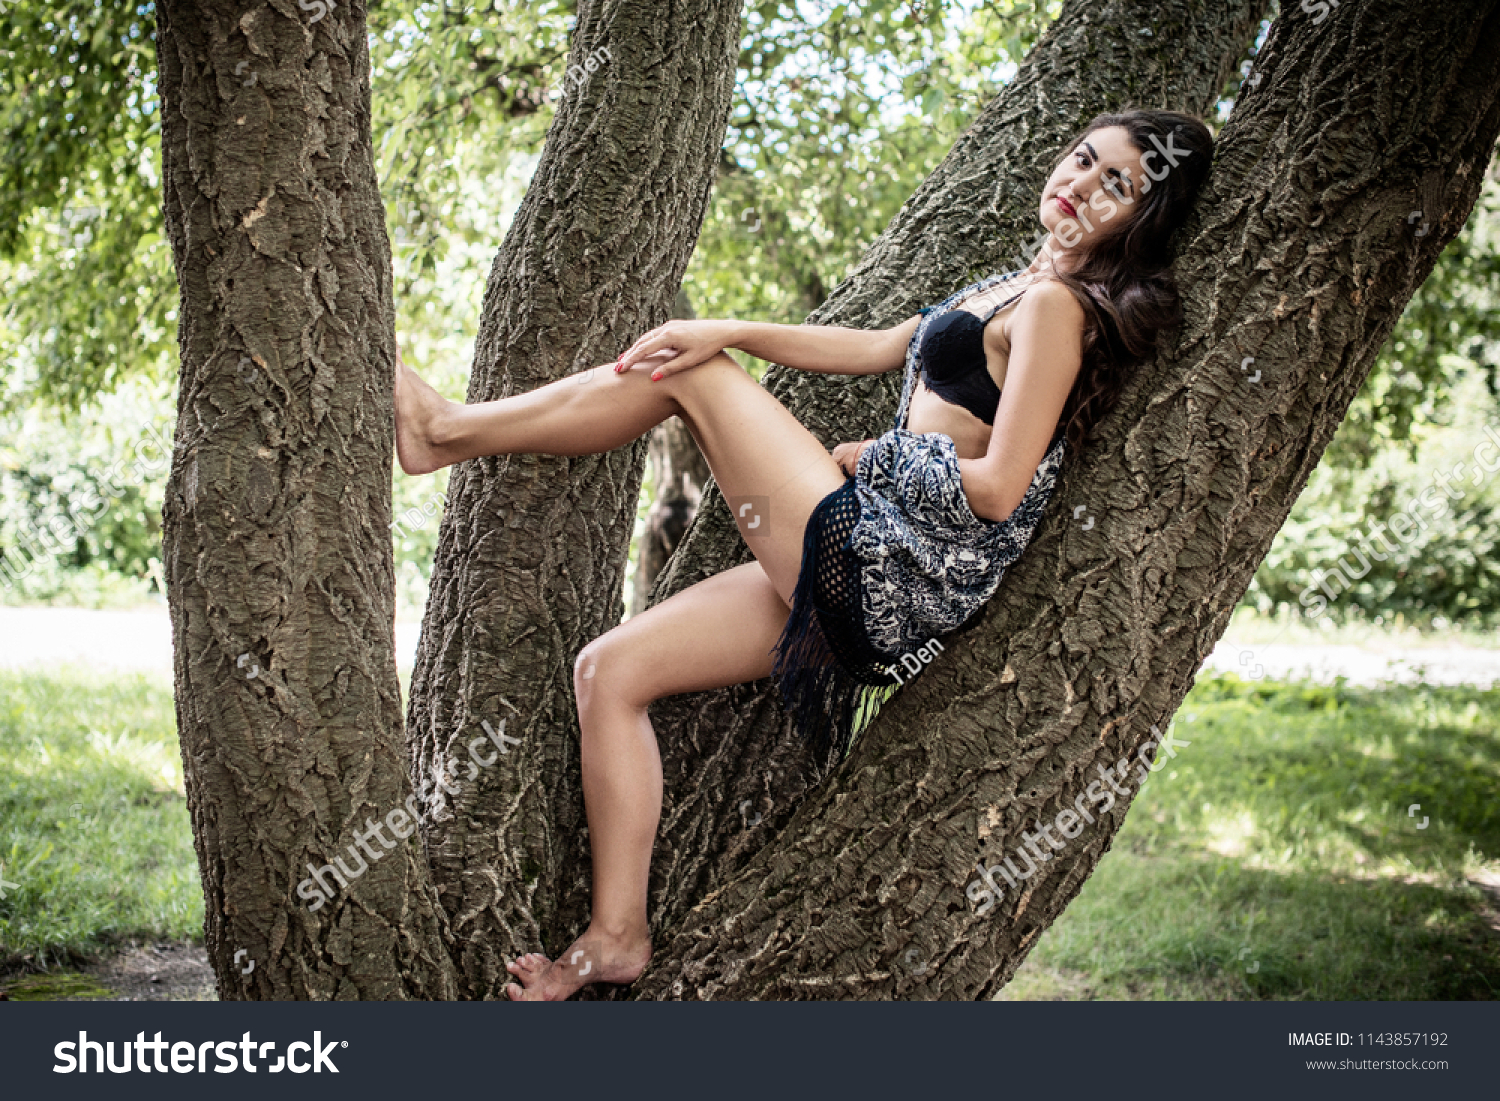 https://image.shutterstock.com/z/stock-photo-fashionable-sexy-woman-with-tan-skin-and-dark-hair-photo-of-dreamy-arabic-girl-posing-at-romantic-1143857192.jpg